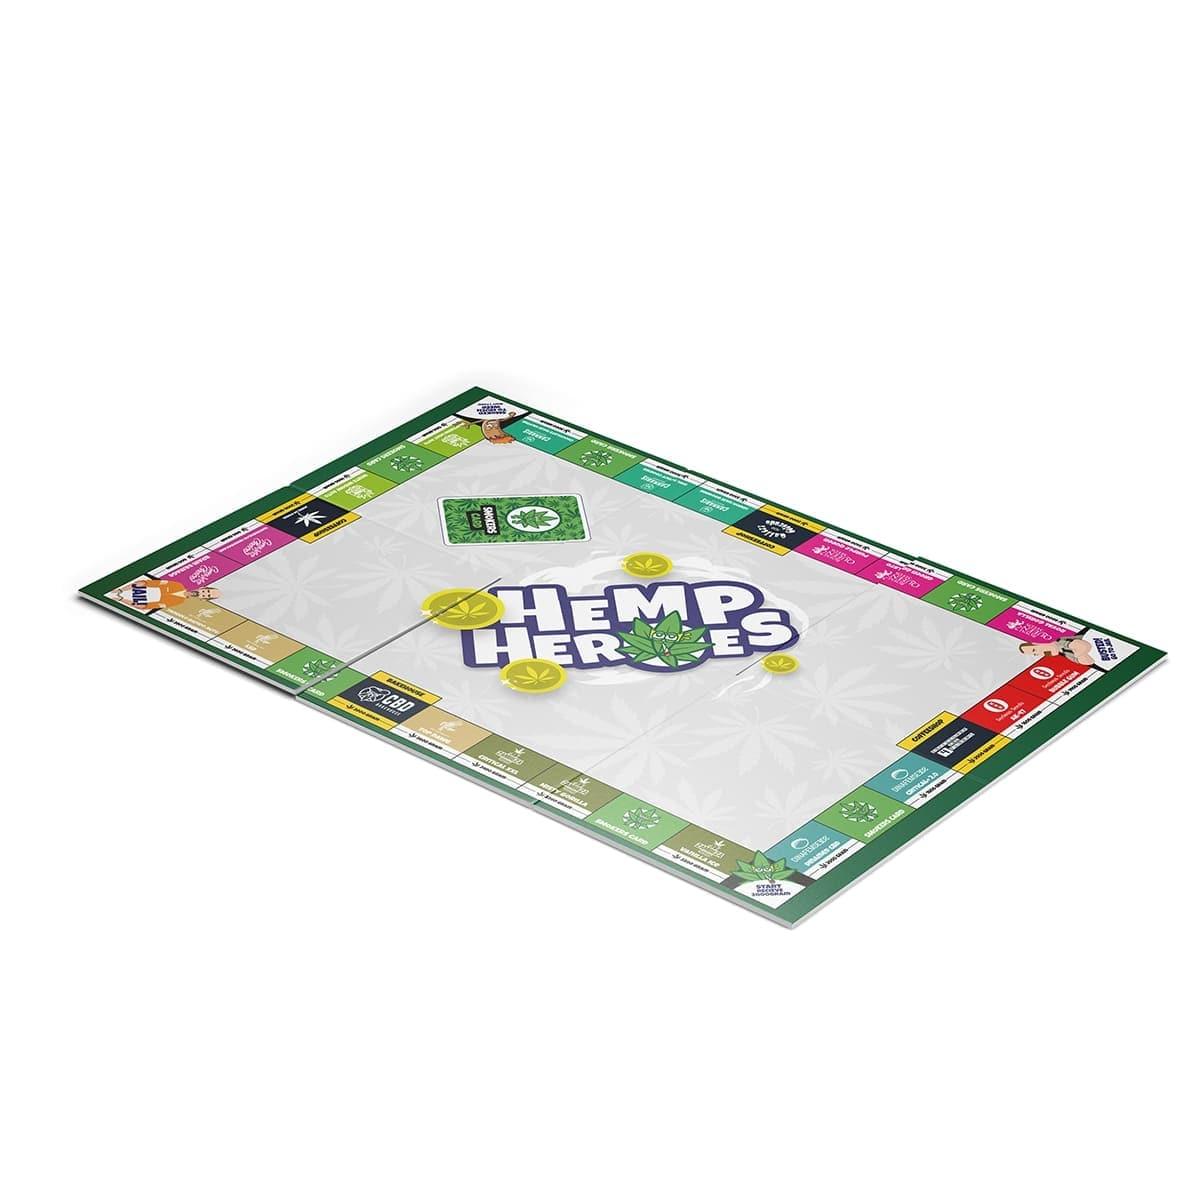 Hemp Heroes The Cannabis Board Game For 2-6 Players - HAPPYTRAIL